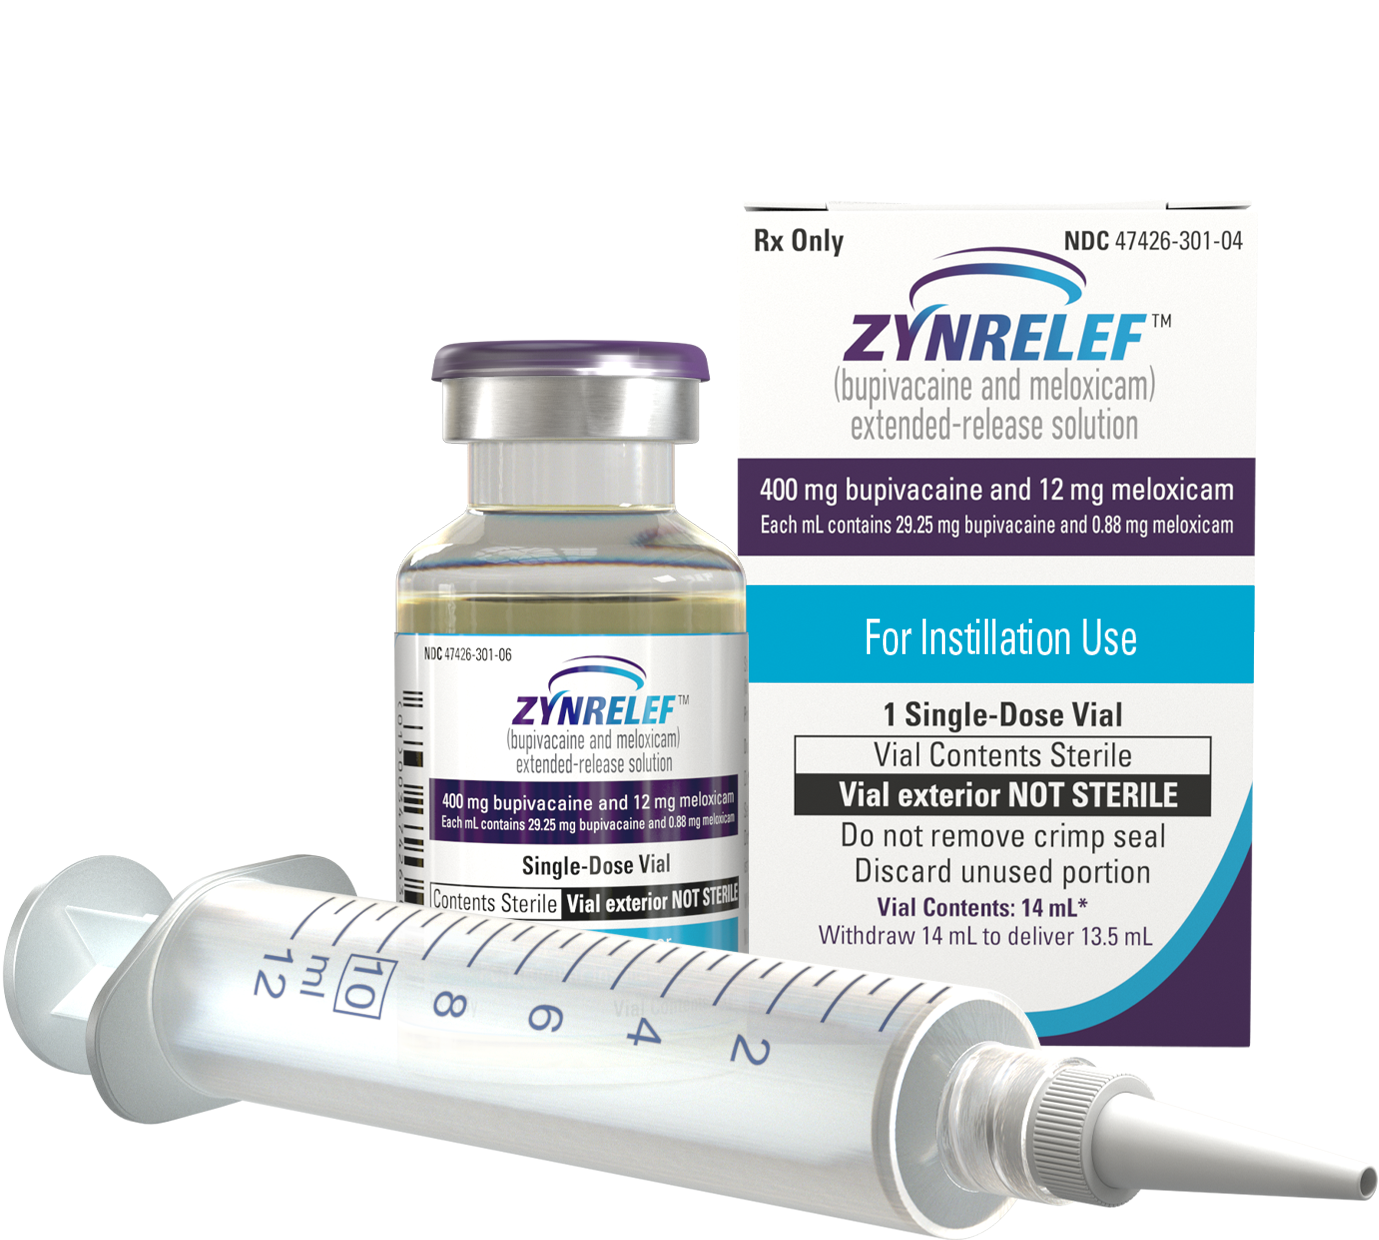 ZYNRELEF box with 14-mL vial next to it; needle-free applicator laying in front of vial and box.